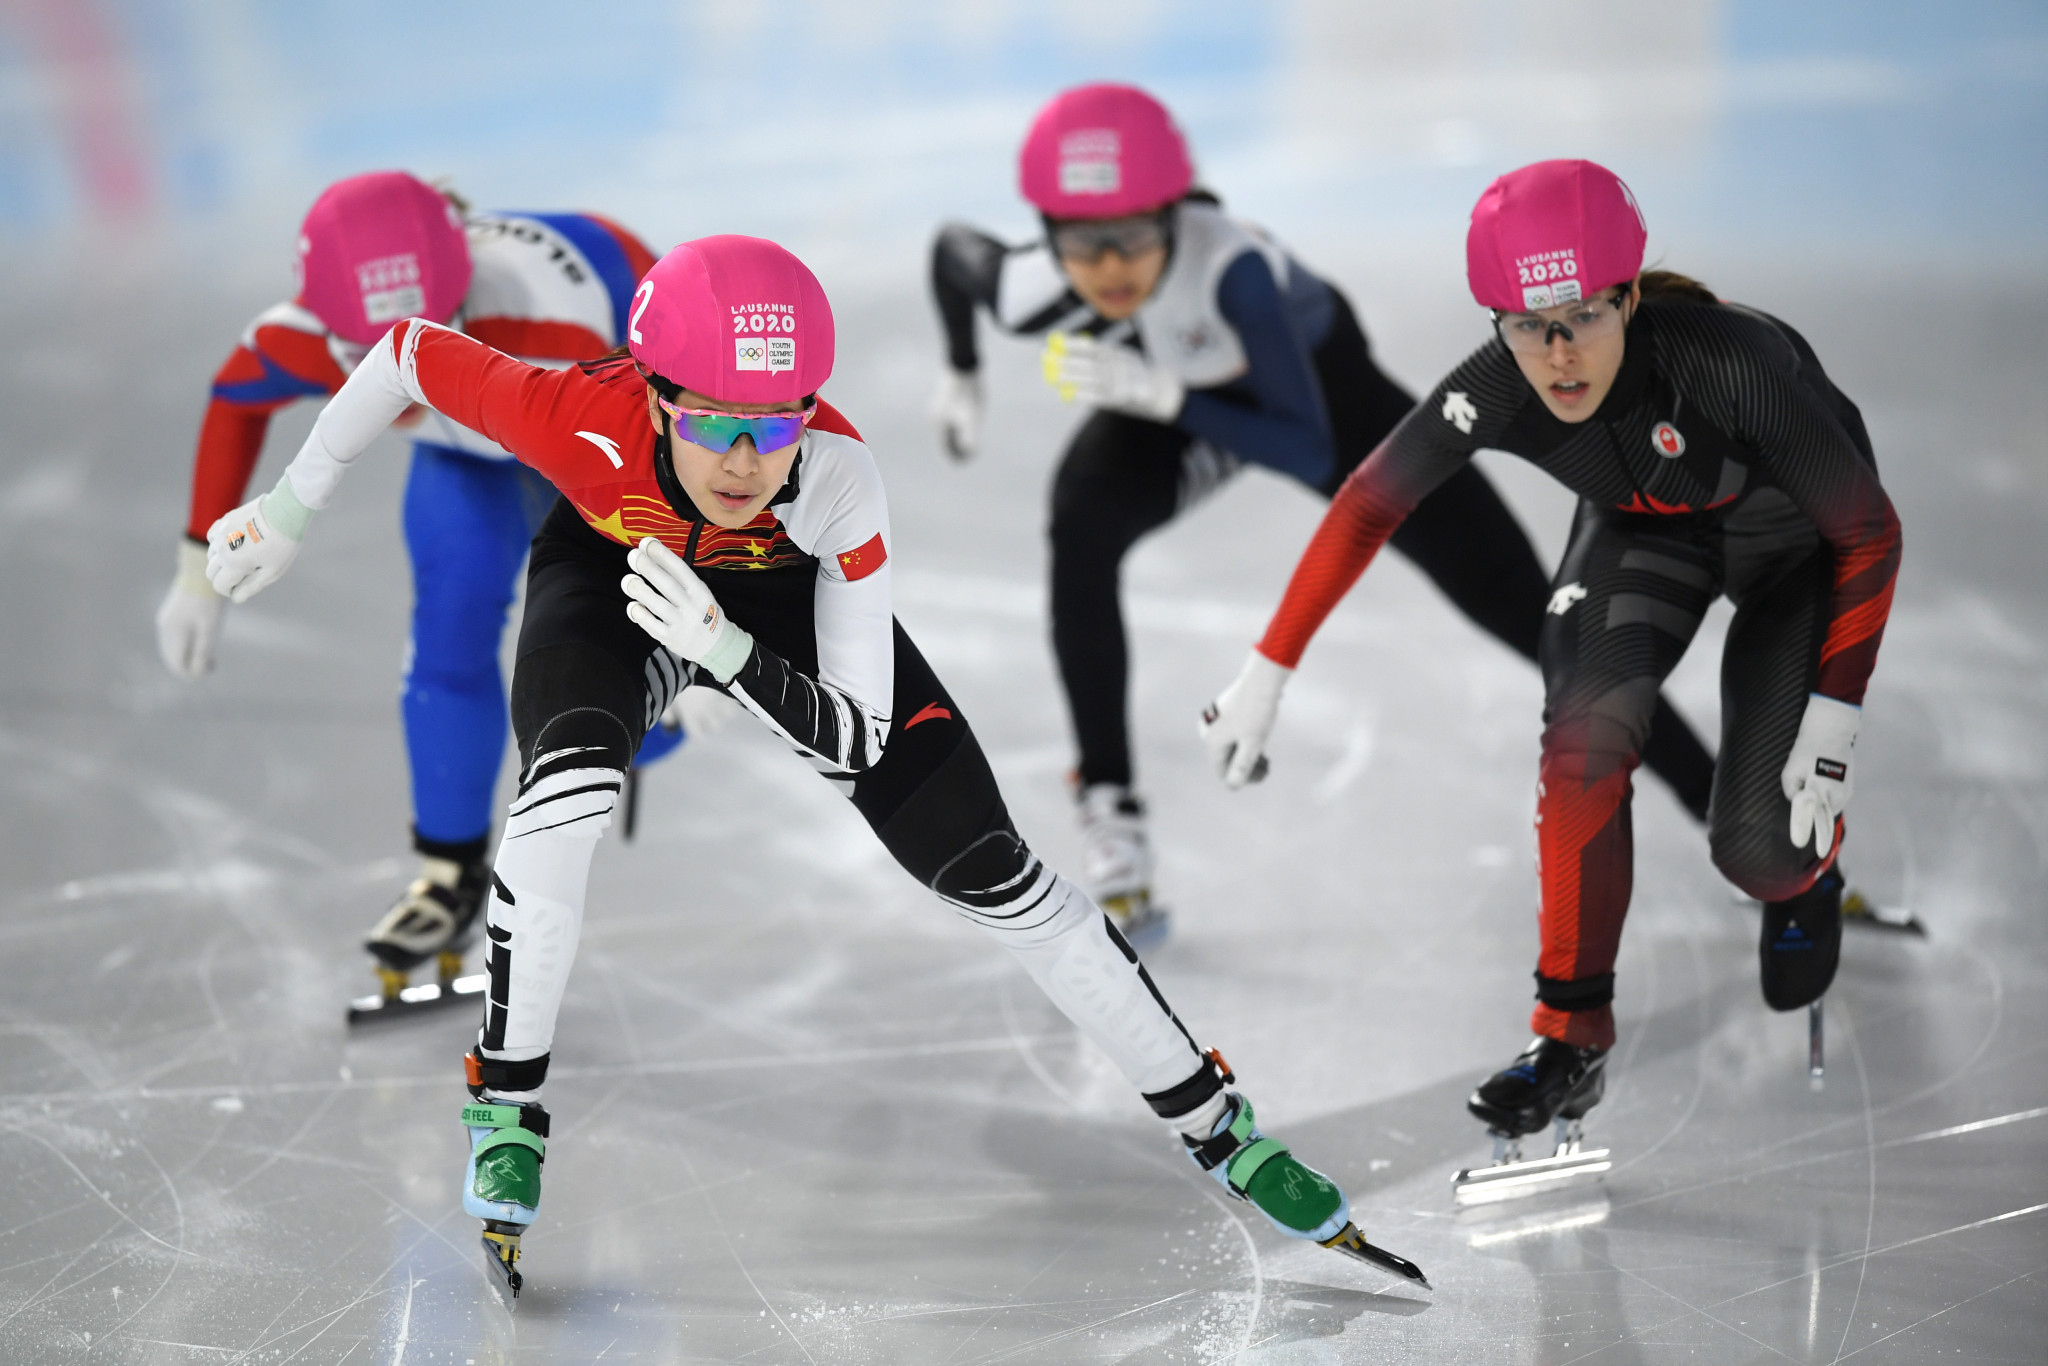 Chutong Zhang, left, leads Florence Brunelle, right, at the Winter Youth Olympics in Lausanne ©Getty Images